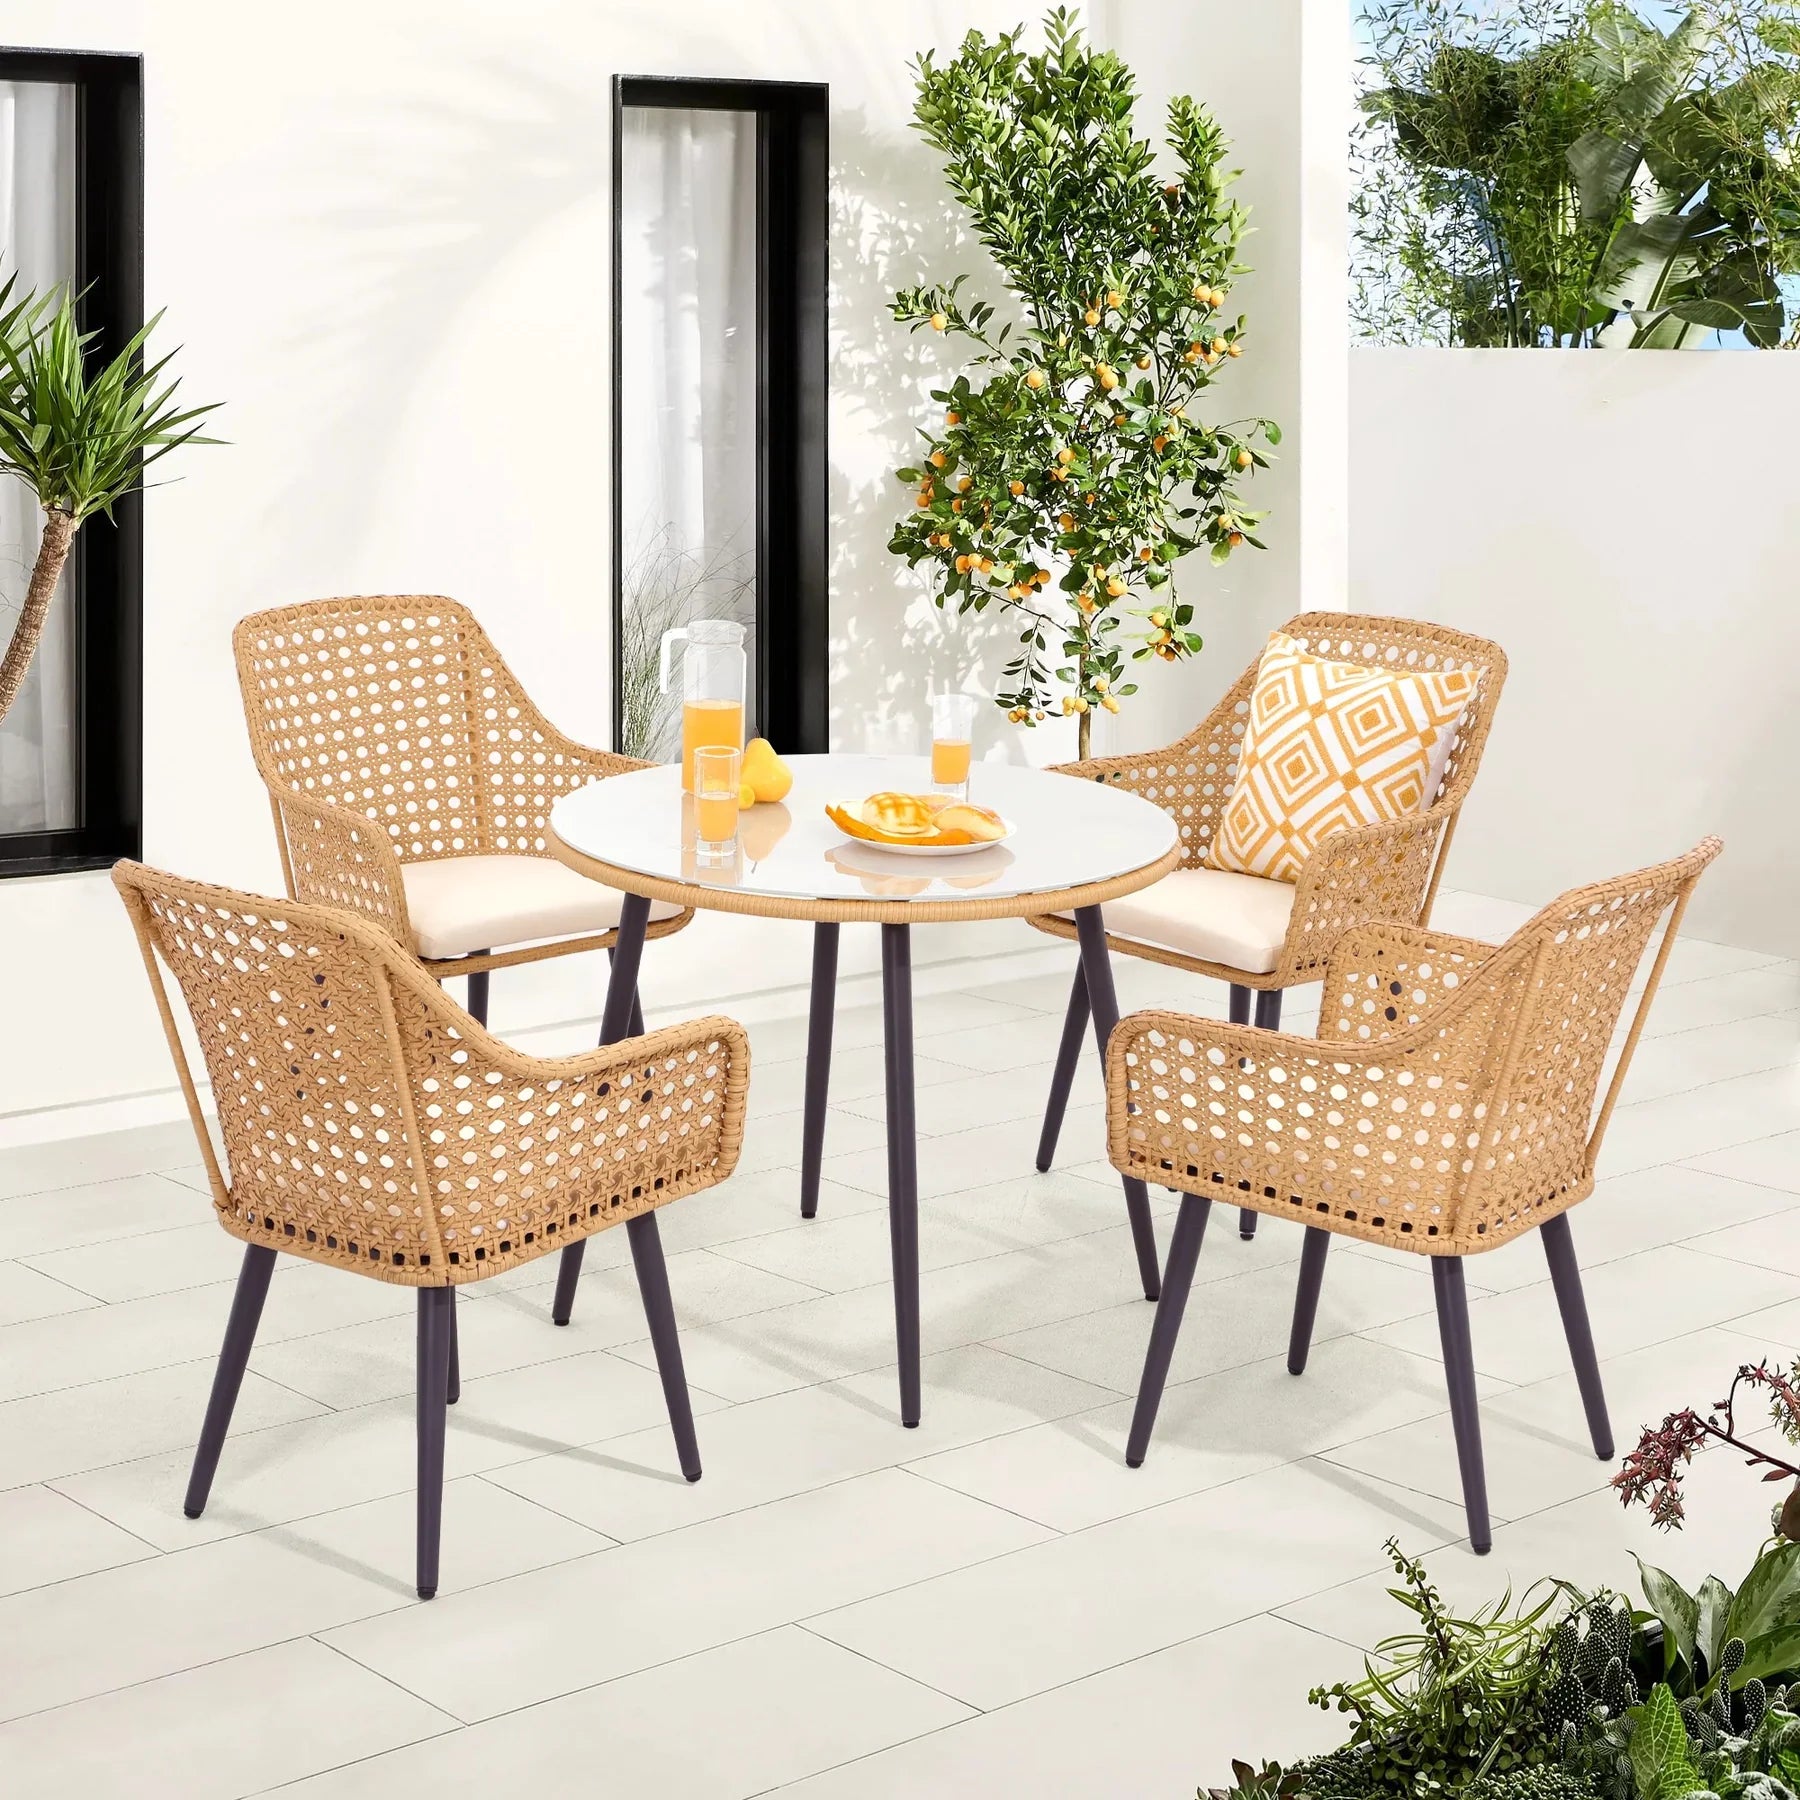 NANO OUTDOOR PATIO SEATING SET 4 CHAIRS AND 1 TABLE SET